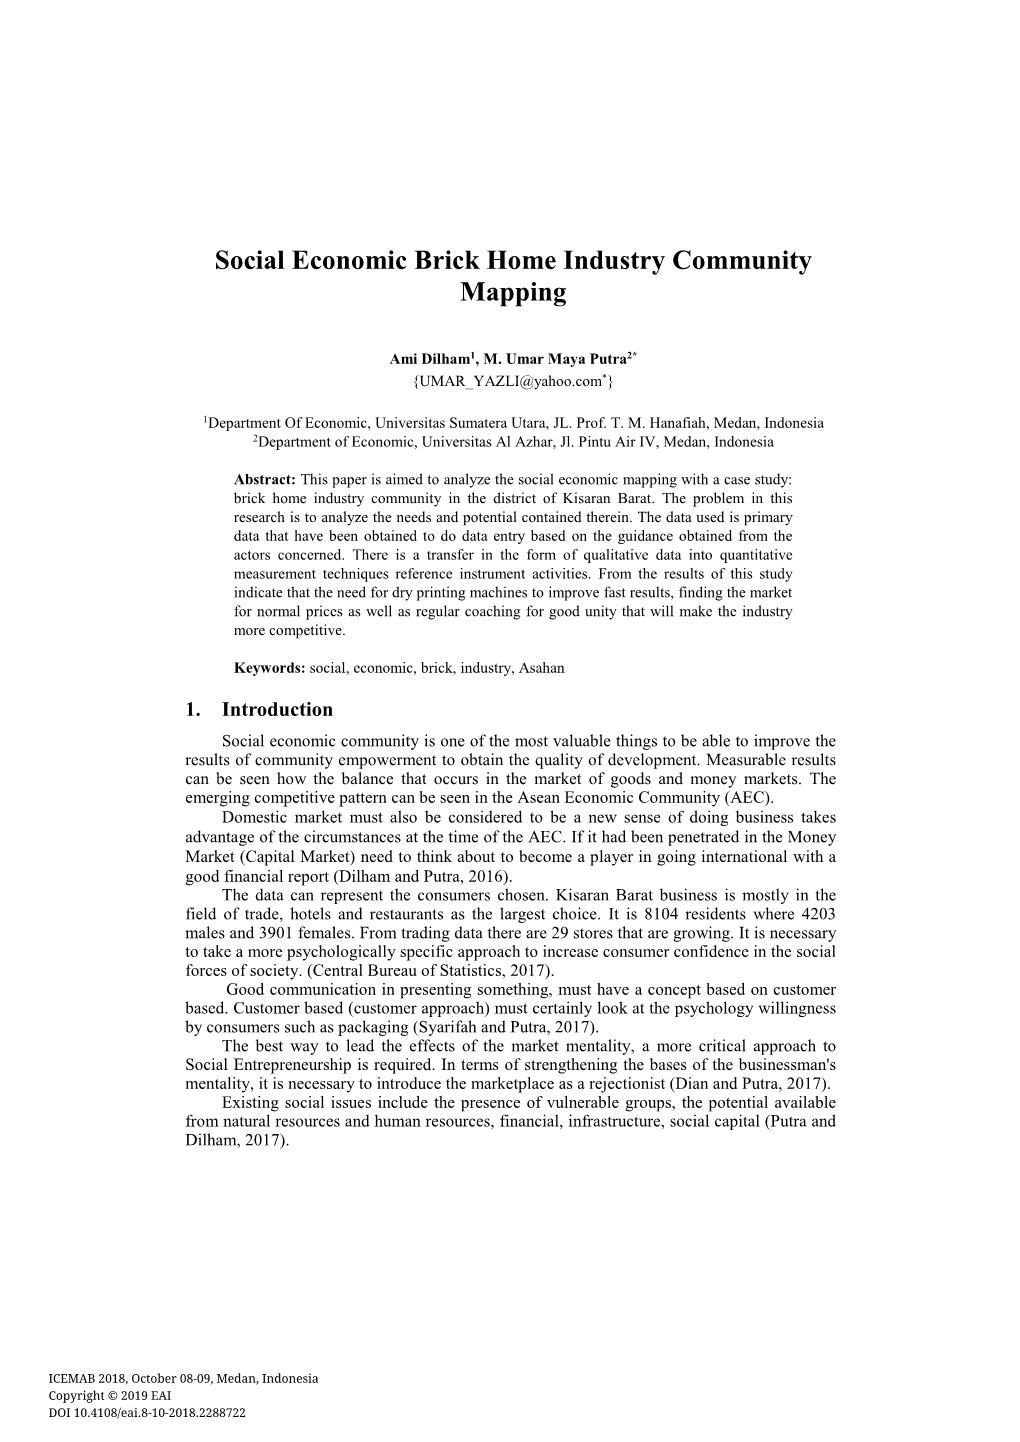 Social Economic Brick Home Industry Community Mapping